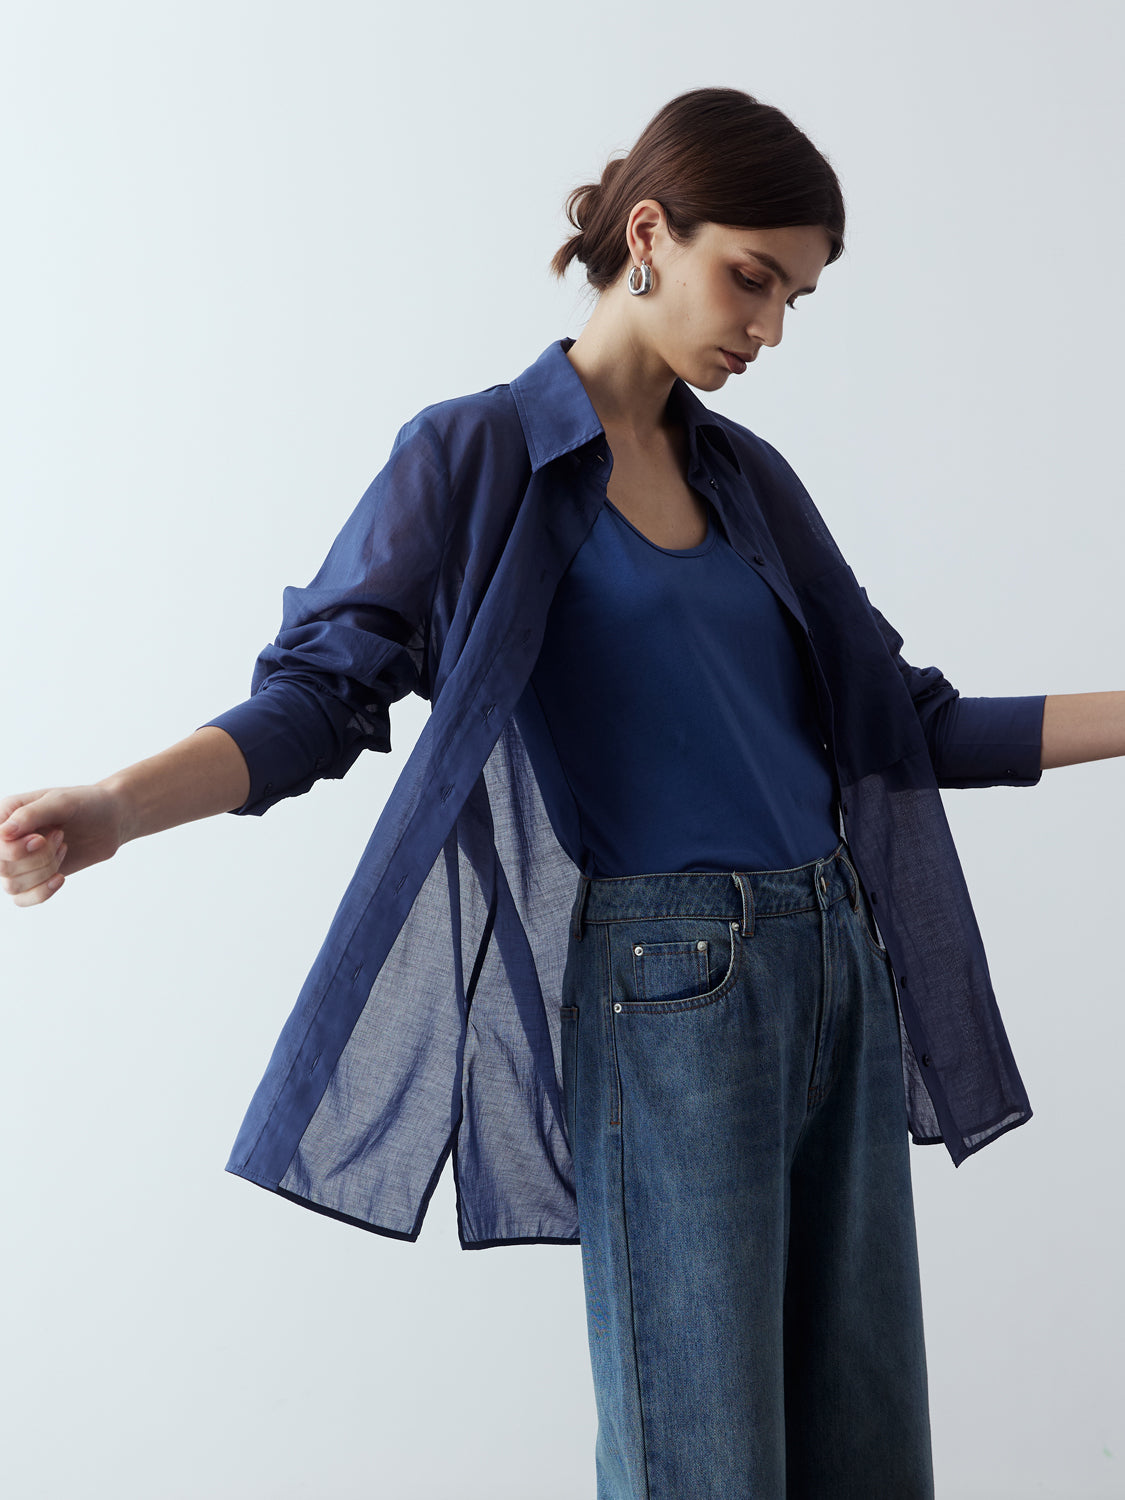 dark blue : Model is wearing the Sheer Long Sleeve Shirt in Dark Blue, which comes with a straight hem, front placket with buttons and a left breast pocket. Worn with the Jersey Tank in Dark Blue, the Denim Straight Cut Jeans and metallic silver heels.